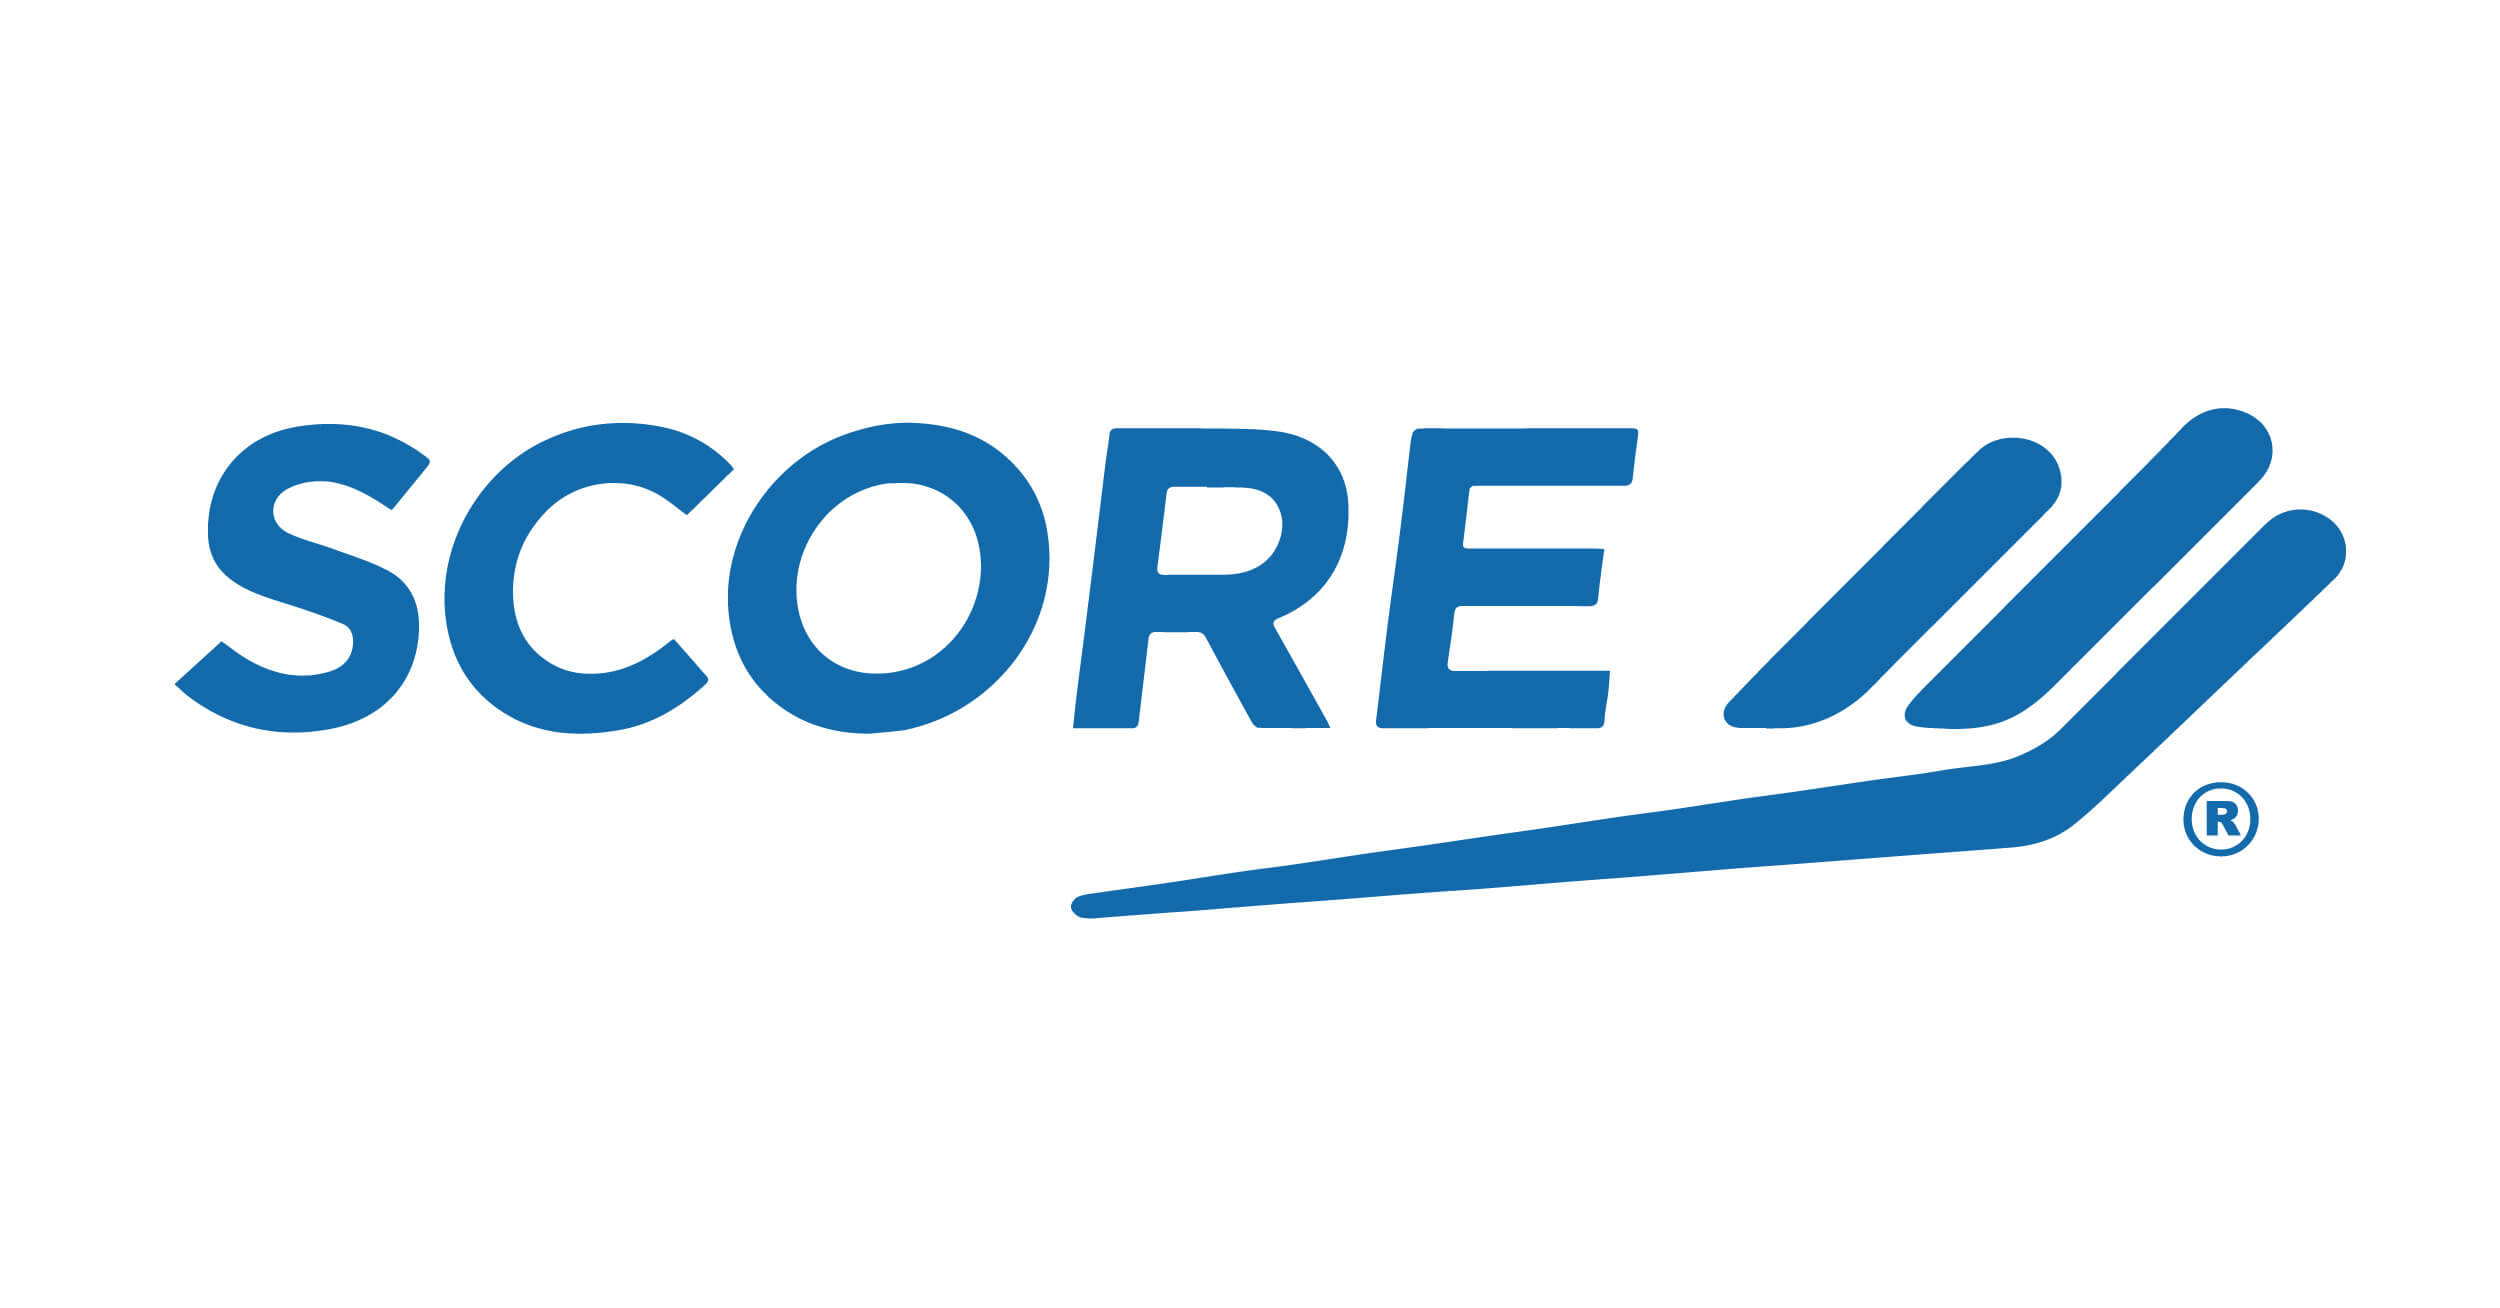 Achieve More with SCORE - Ticket to Work - Social Security